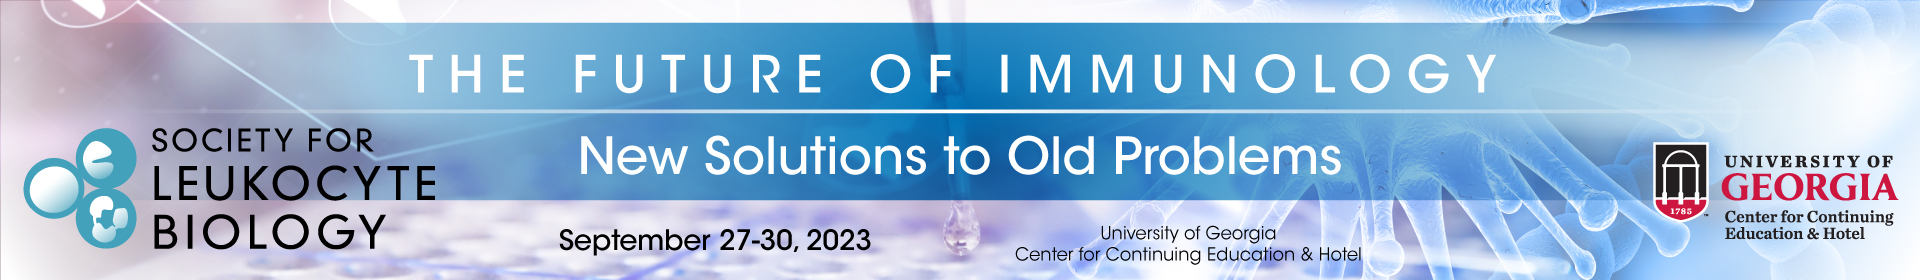 SLB 2023: The Future of Immunology: New Solutions to Old Problems Event Banner